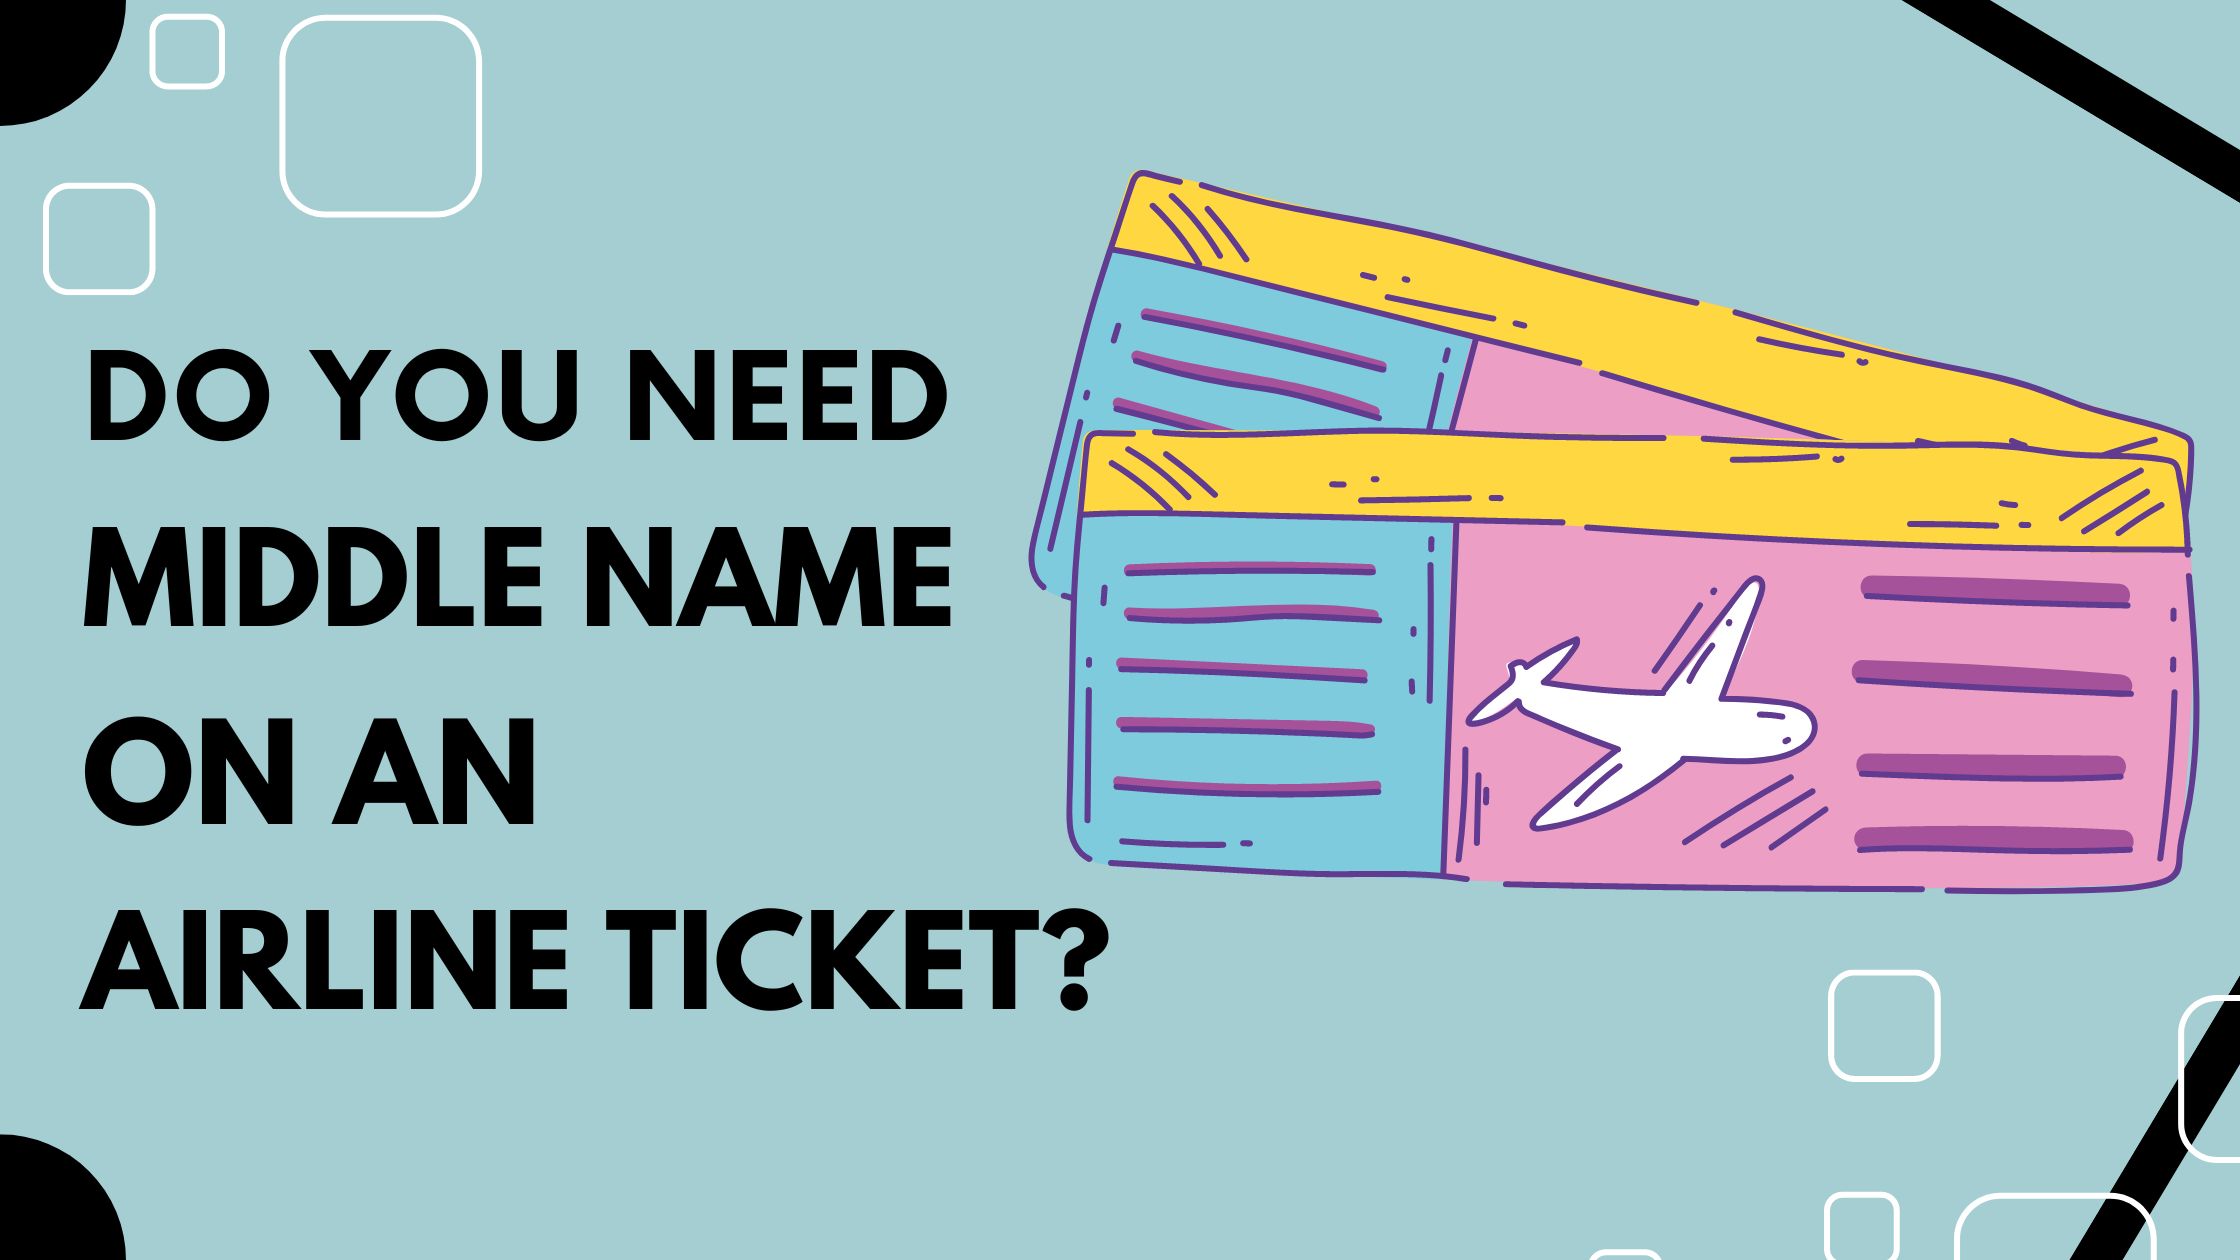 Do You Need Middle Name On An Airline Ticket